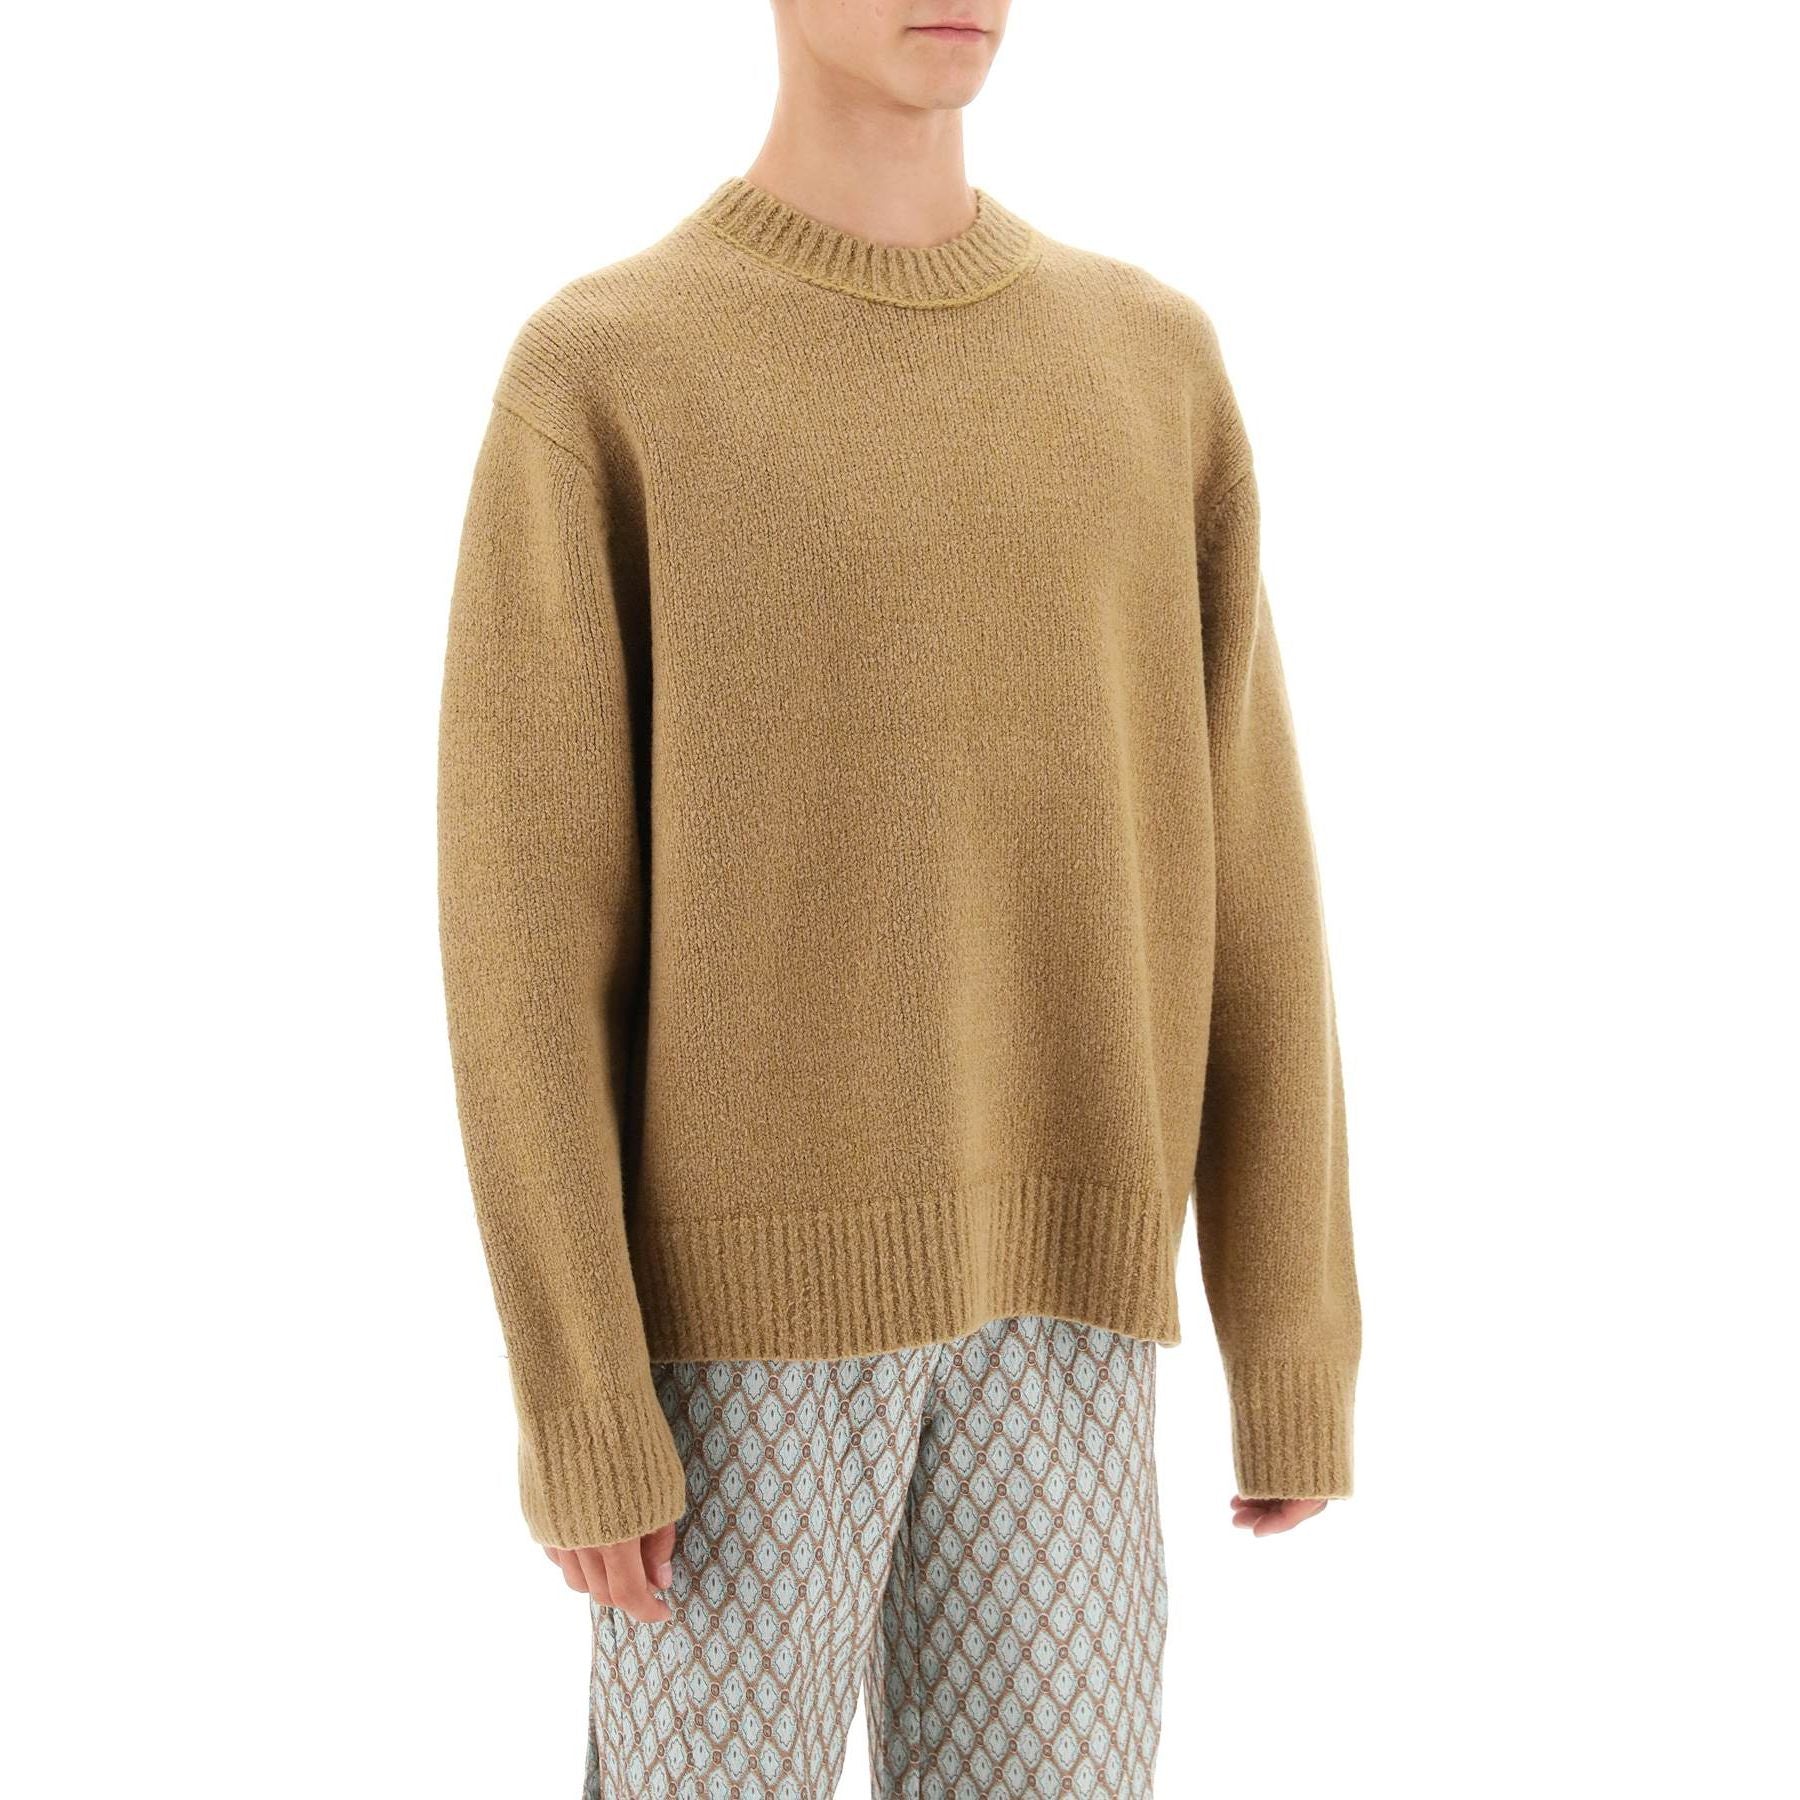 Wool and Cotton Blend Crew Neck Sweater